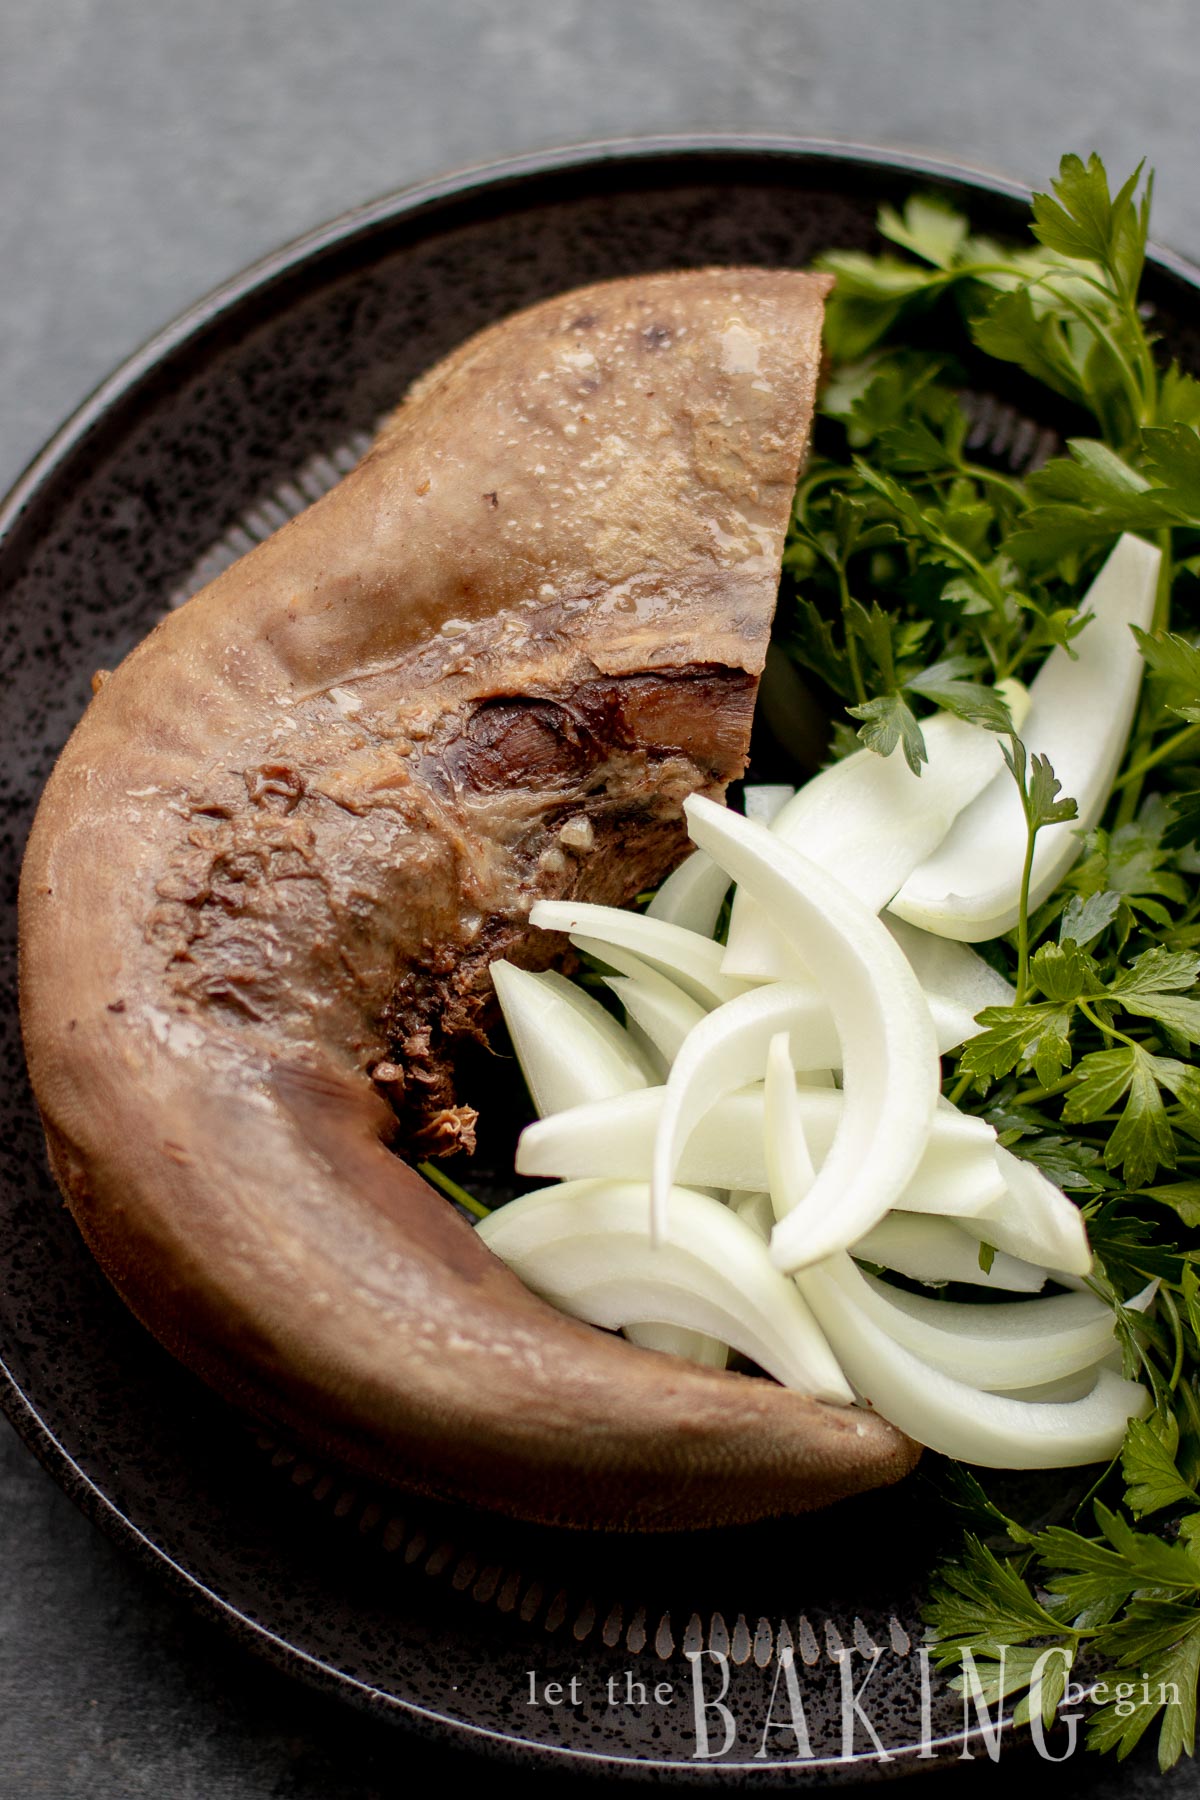 Cooked beef tongue with sliced onions and herbs